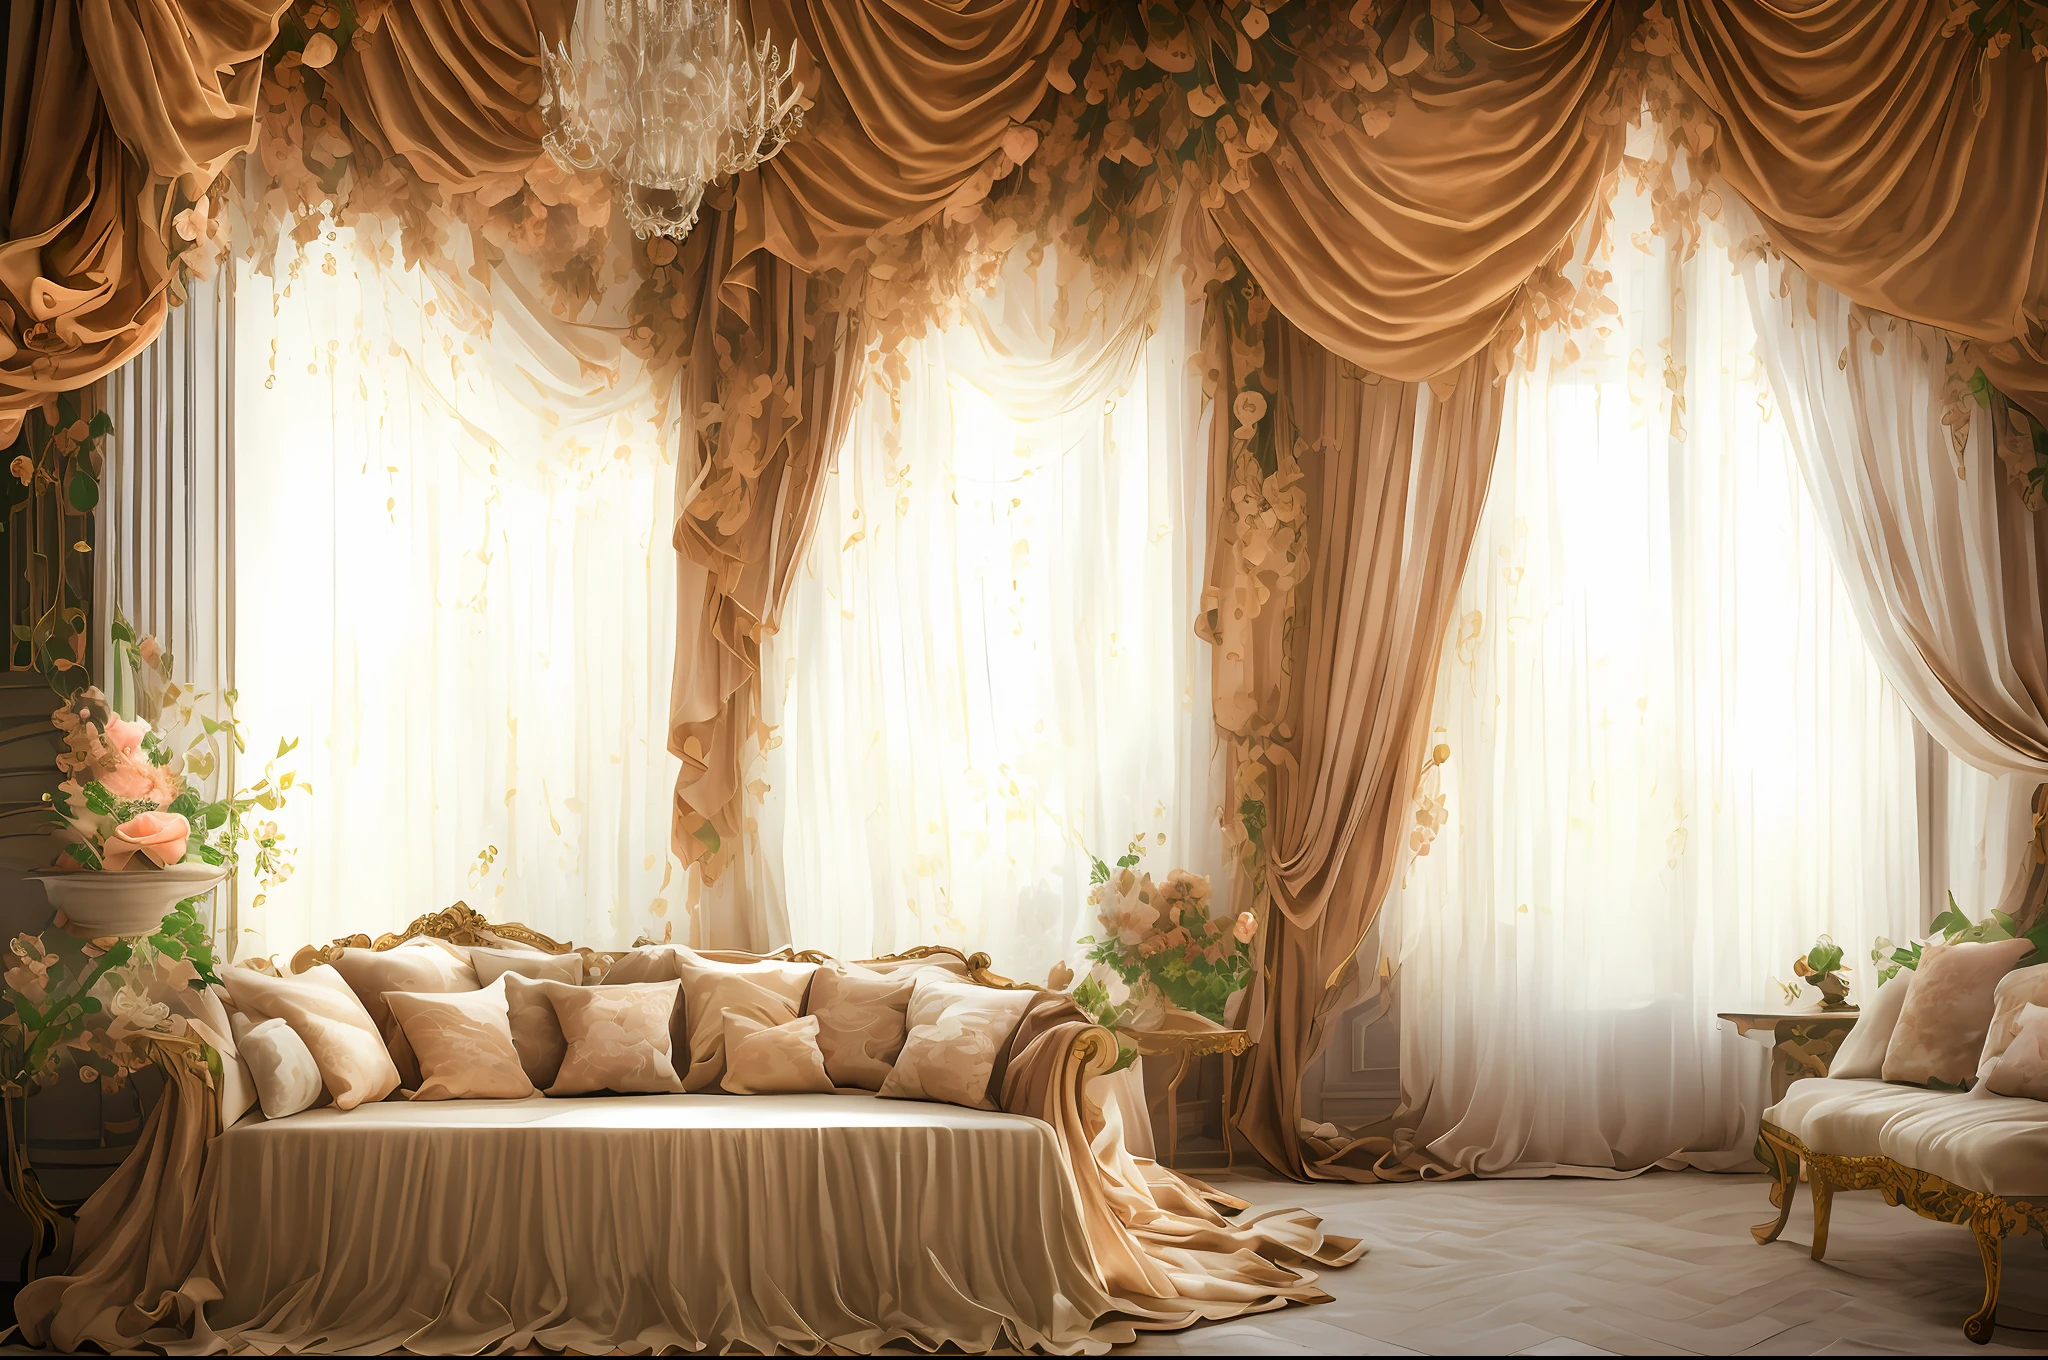 there is a room with a window and a curtain with flowers, beautiful drapes, background made of big curtains, atmospheric beautiful details, stunning arcanum backdrop, baroque style painting backdrop, beautiful studio soft light, cream - colored room, dreamy atmosphere and drama, with backdrop of natural light, lavishly decorated, ornate backdrop, draped in velvet and flowers